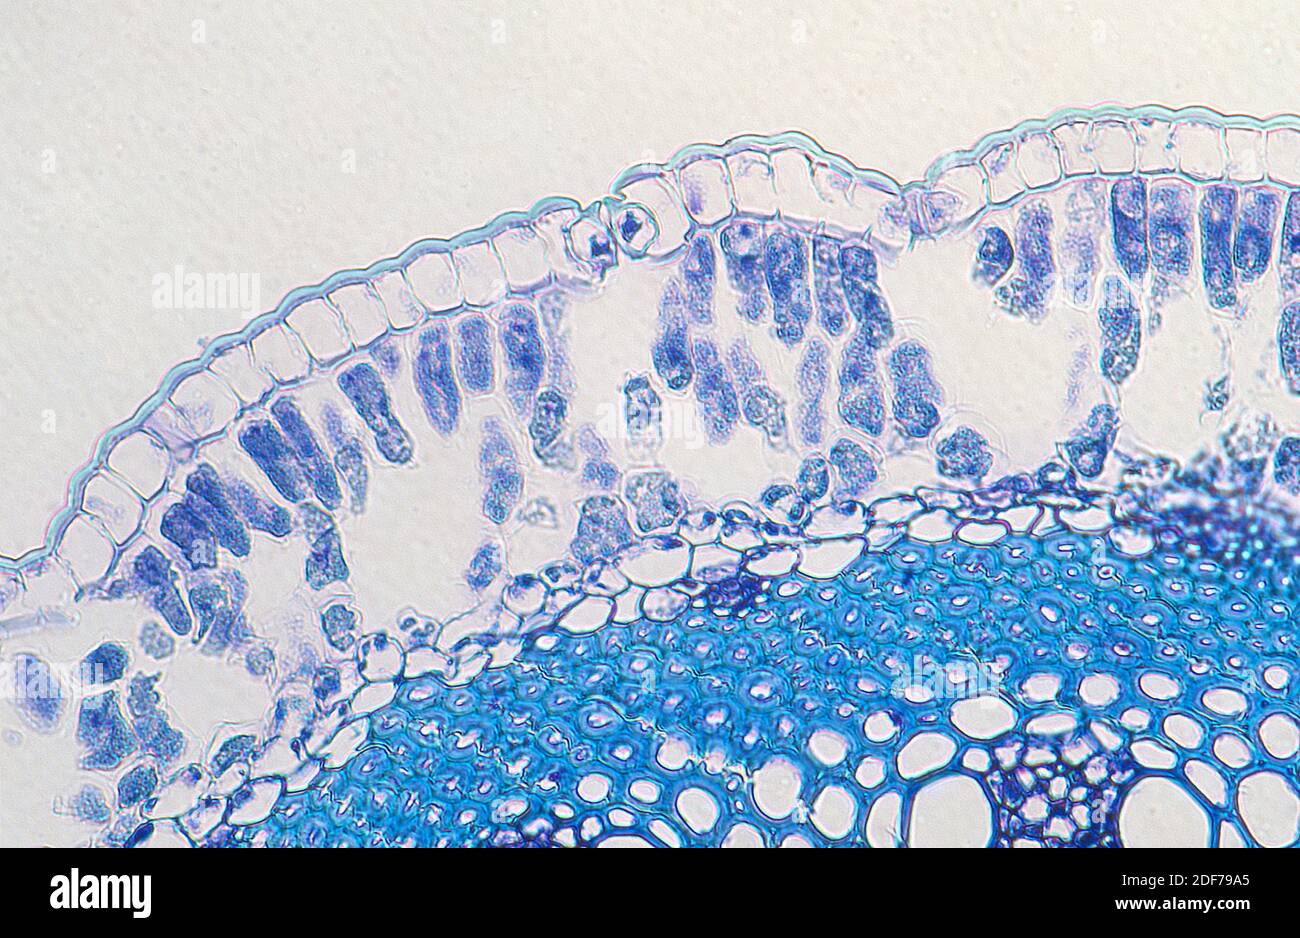 Leaf, cross section showing upper epidermis with cuticle, stomata, palisade parenchyma, spongy parenchyma and colenchyma. Photomicrograph. Stock Photo